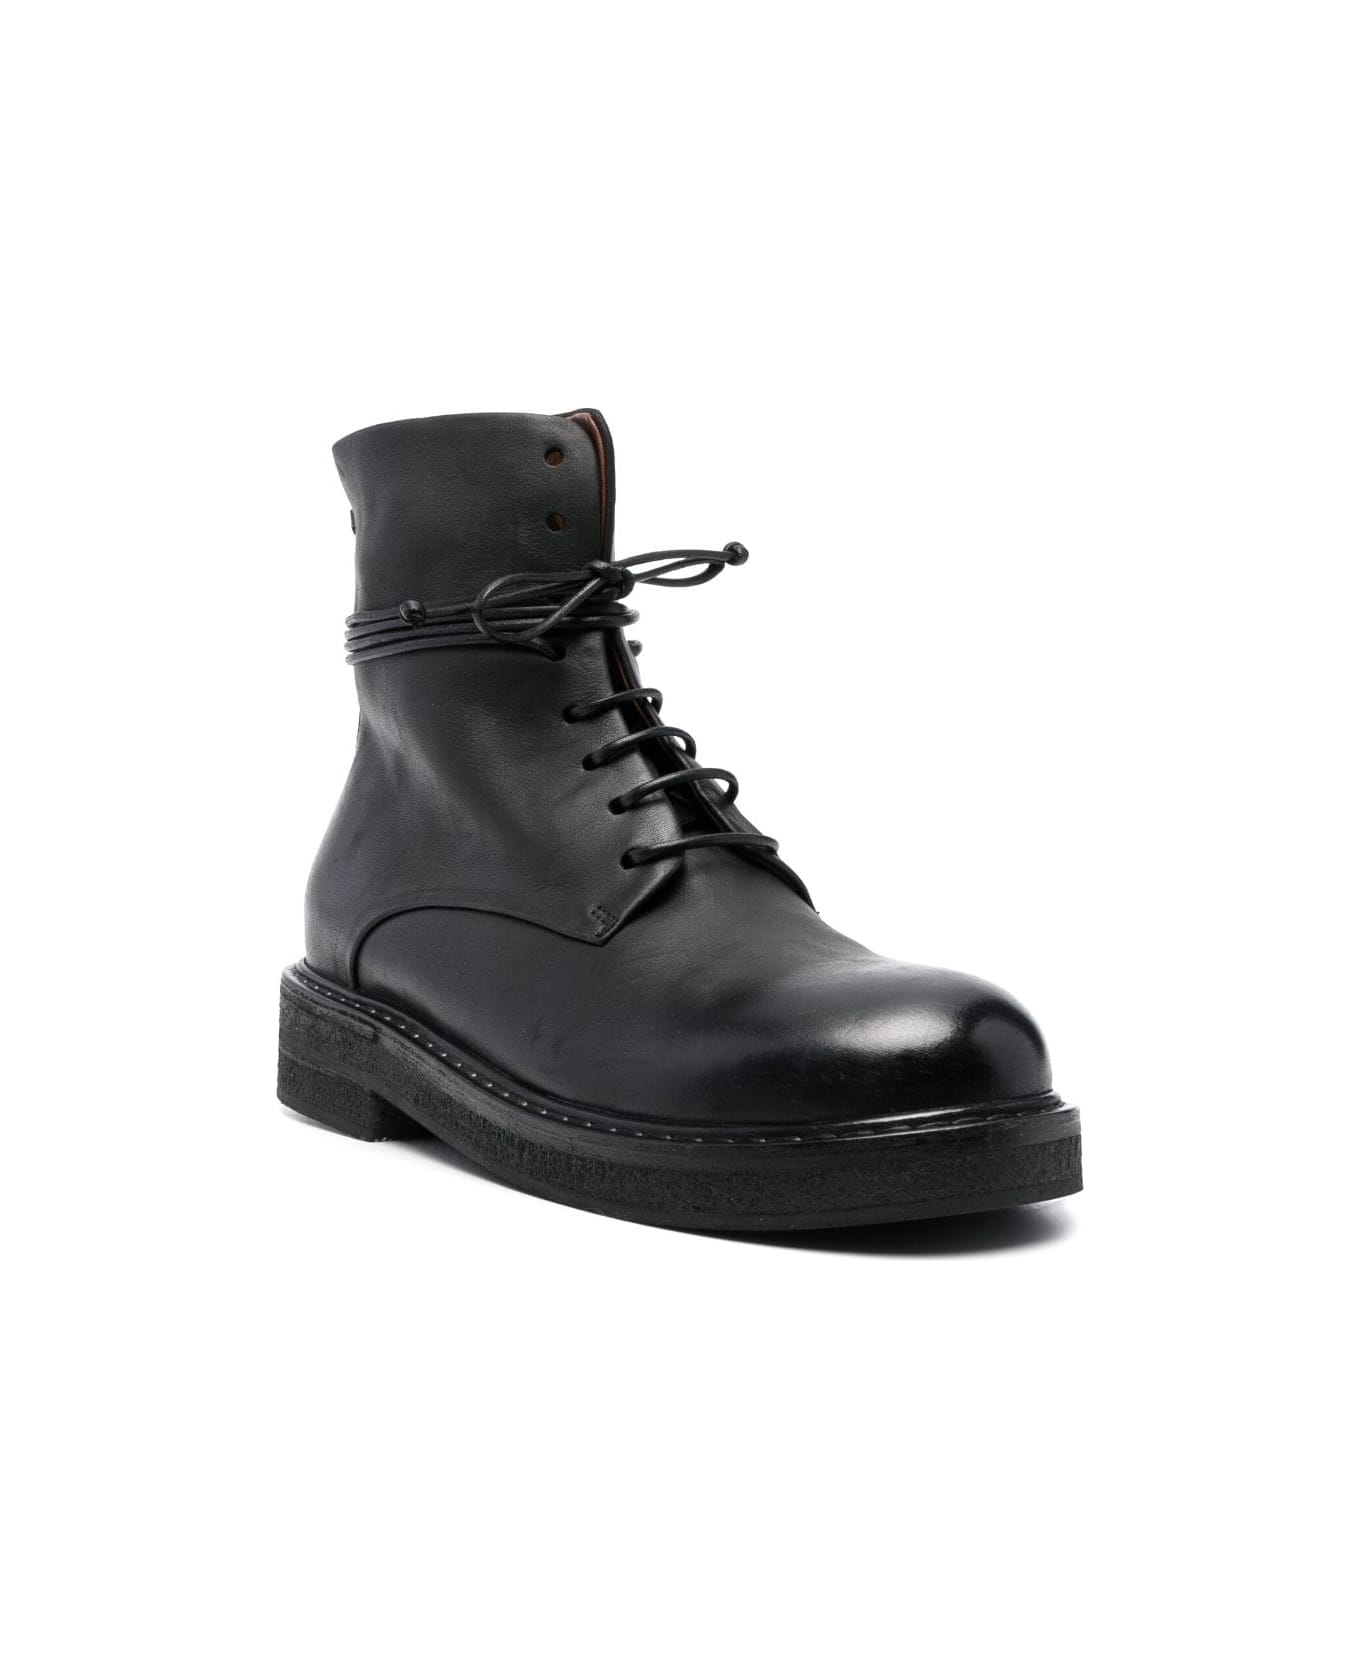 Marsell Parrucca Zipped Ankle Boots - Black ブーツ